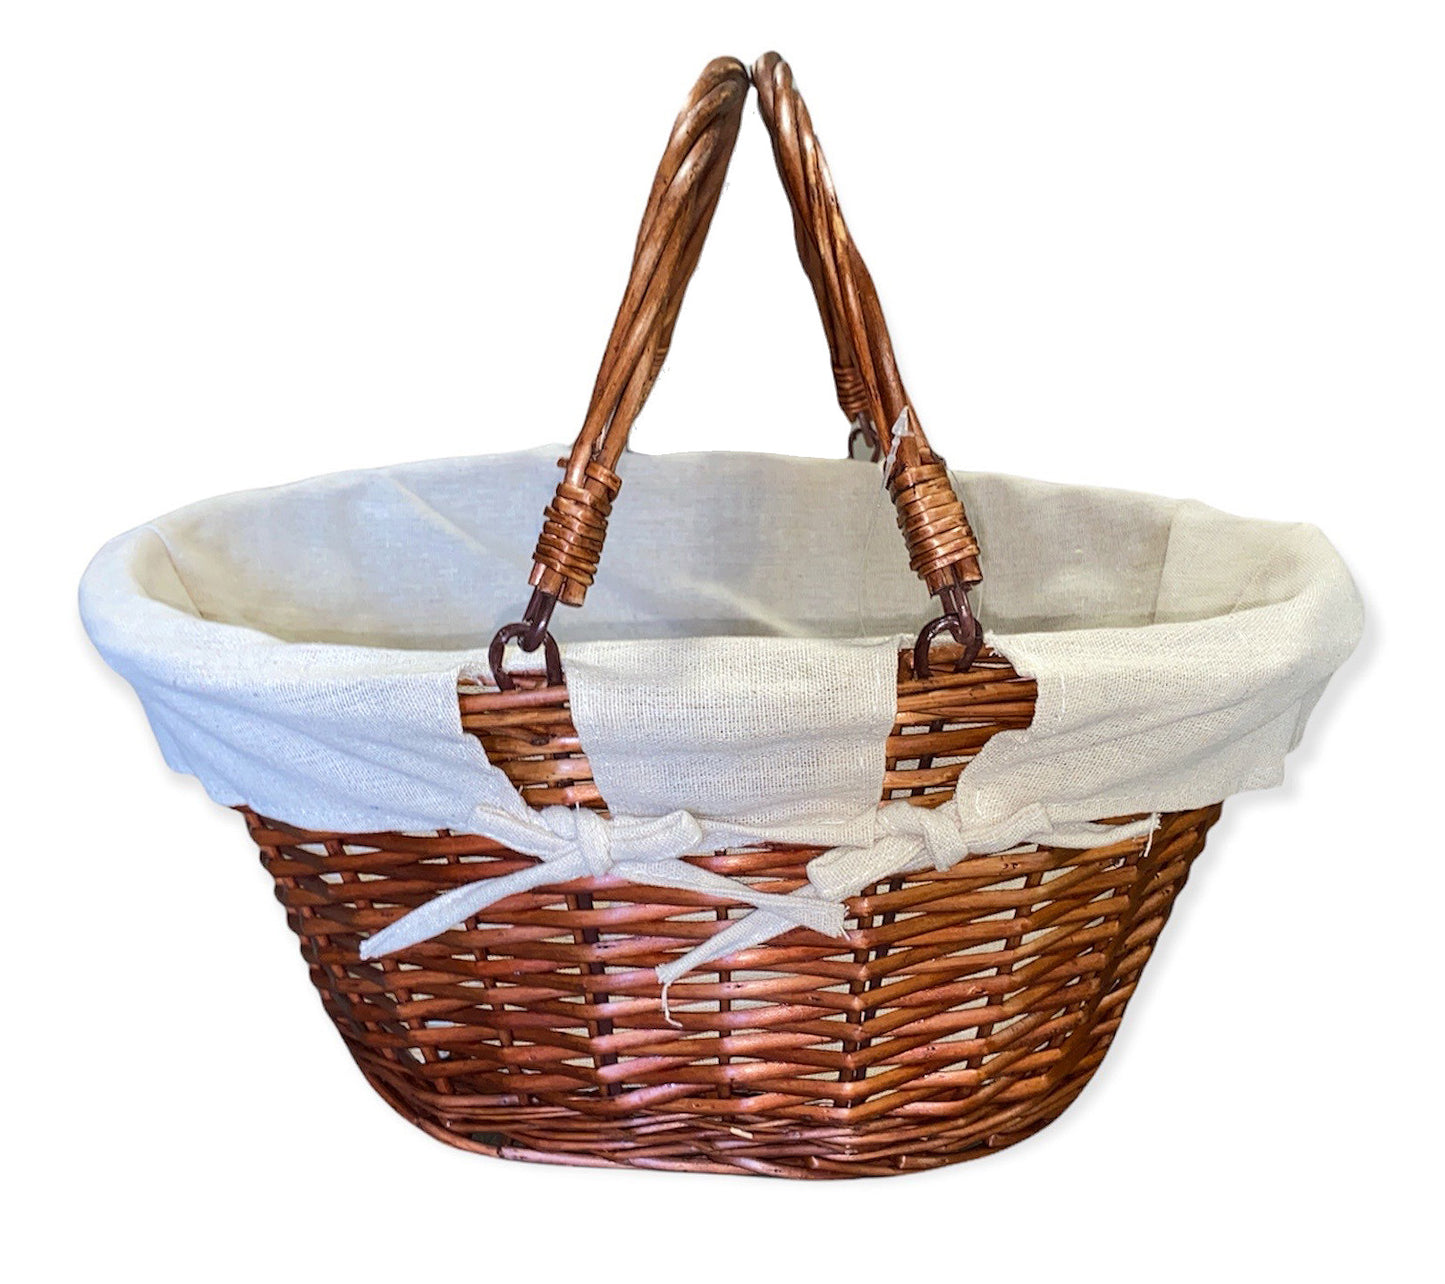 Oval Shopping Basket with Swing Handles - Brown Split Willow with Beige Canvas Lining - 16 x 13.5 x 8 deep 14 inch OAH - 12 per bundle - NEW222